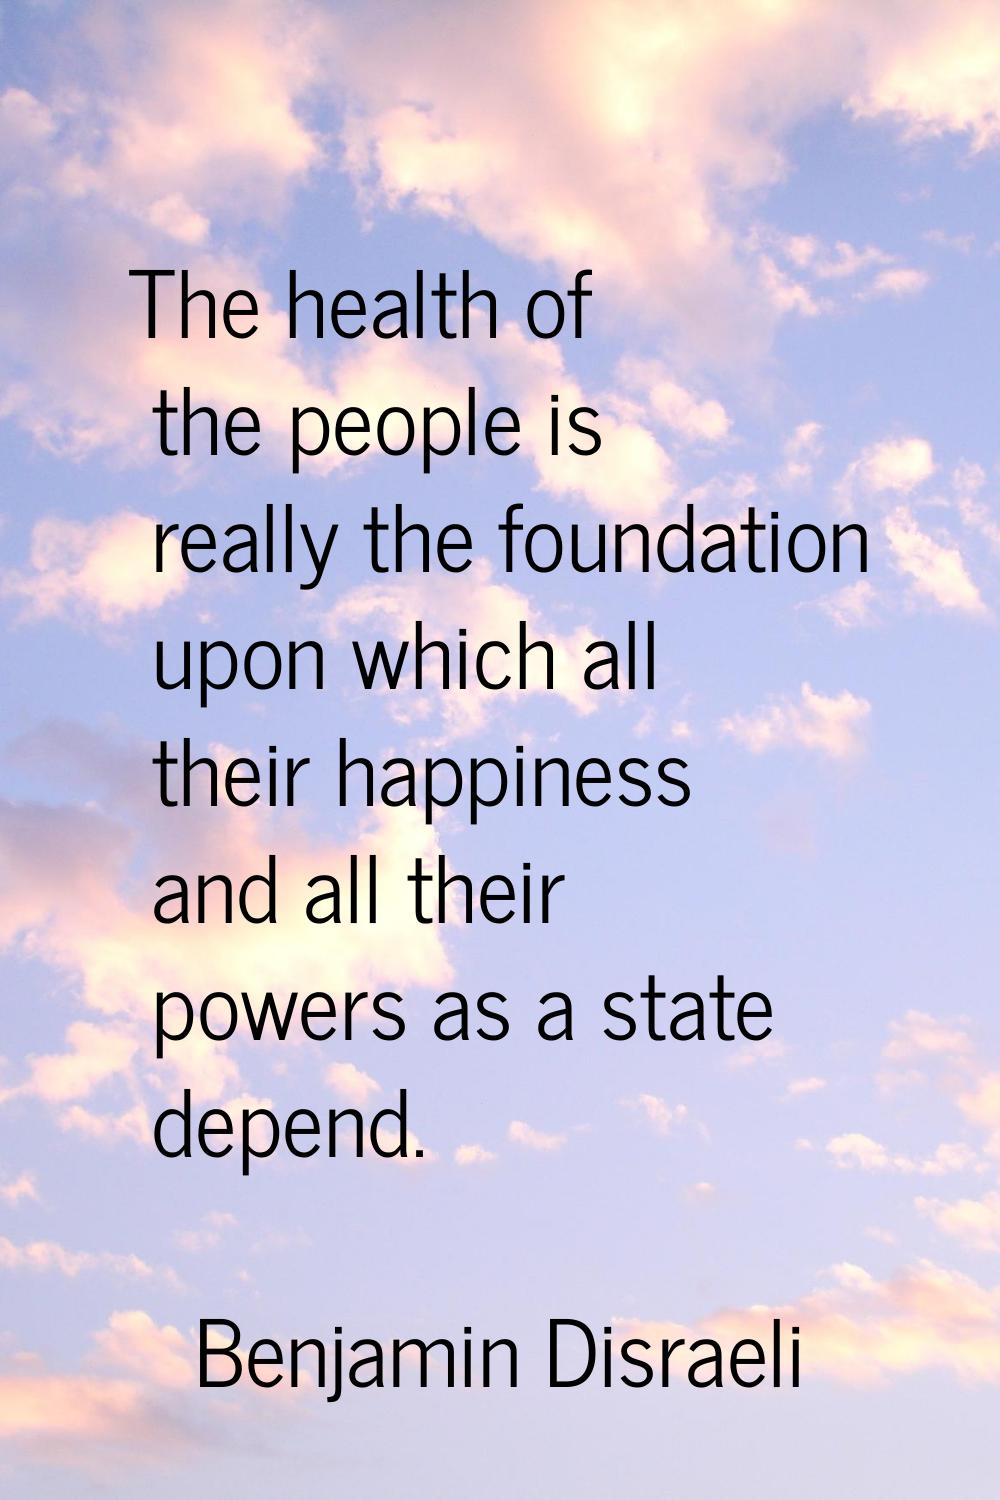 The health of the people is really the foundation upon which all their happiness and all their powe